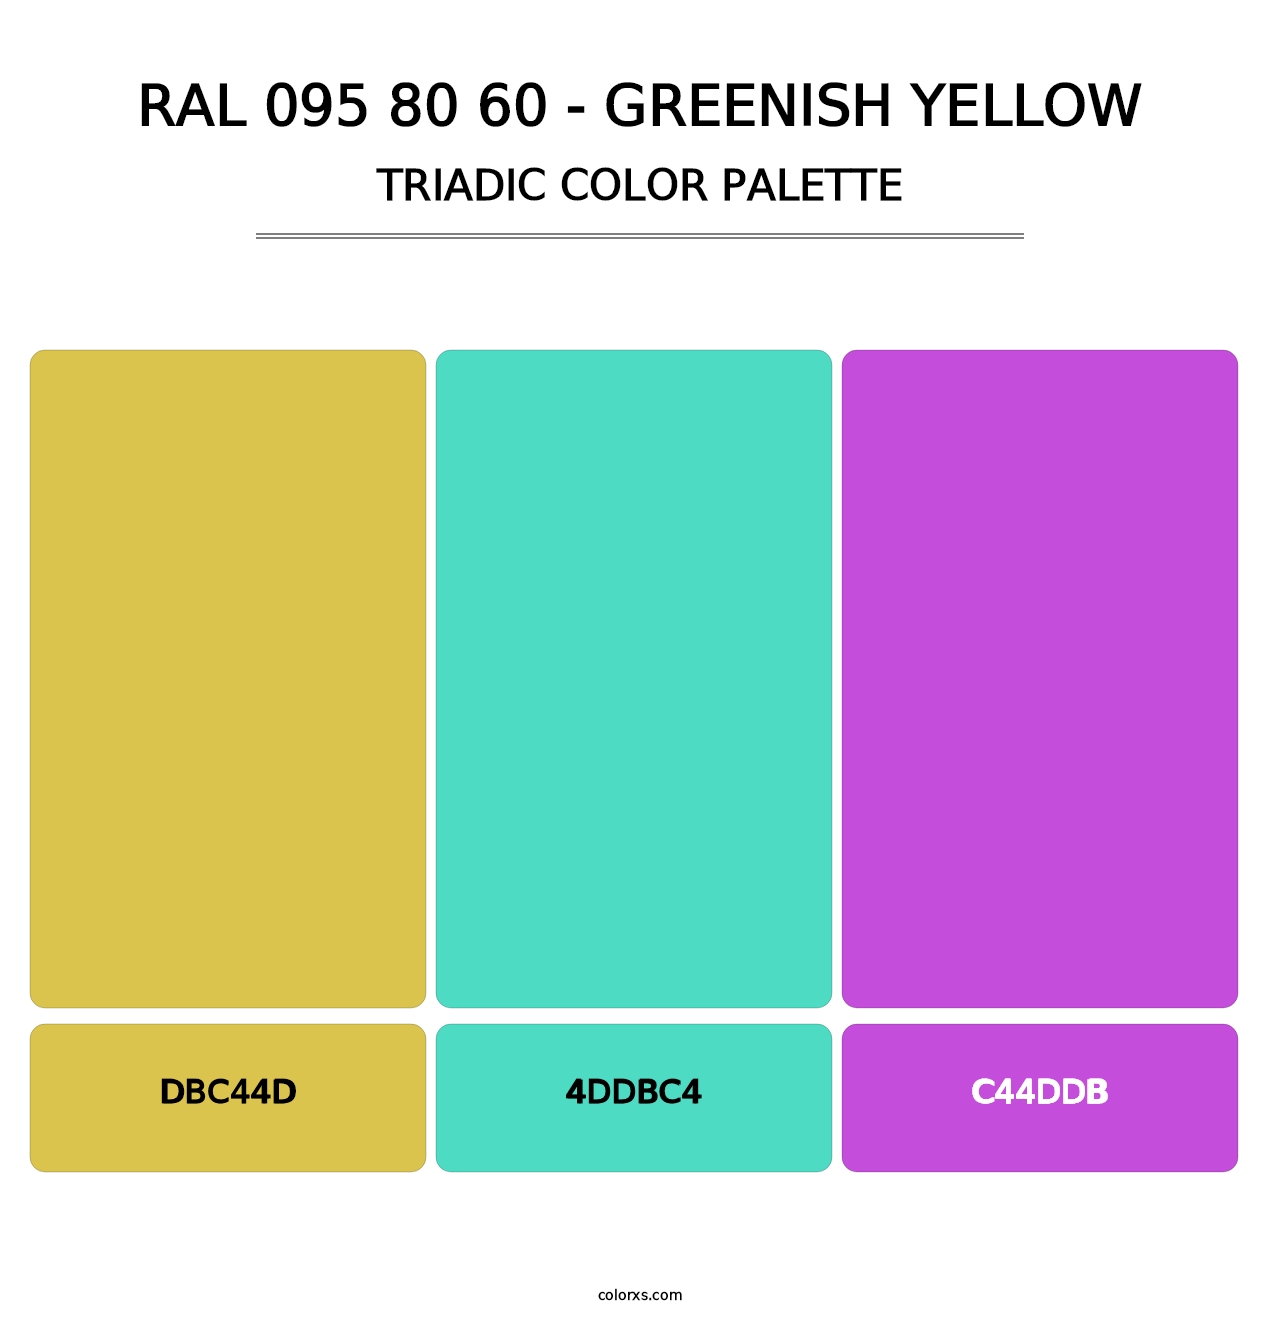 RAL 095 80 60 - Greenish Yellow - Triadic Color Palette